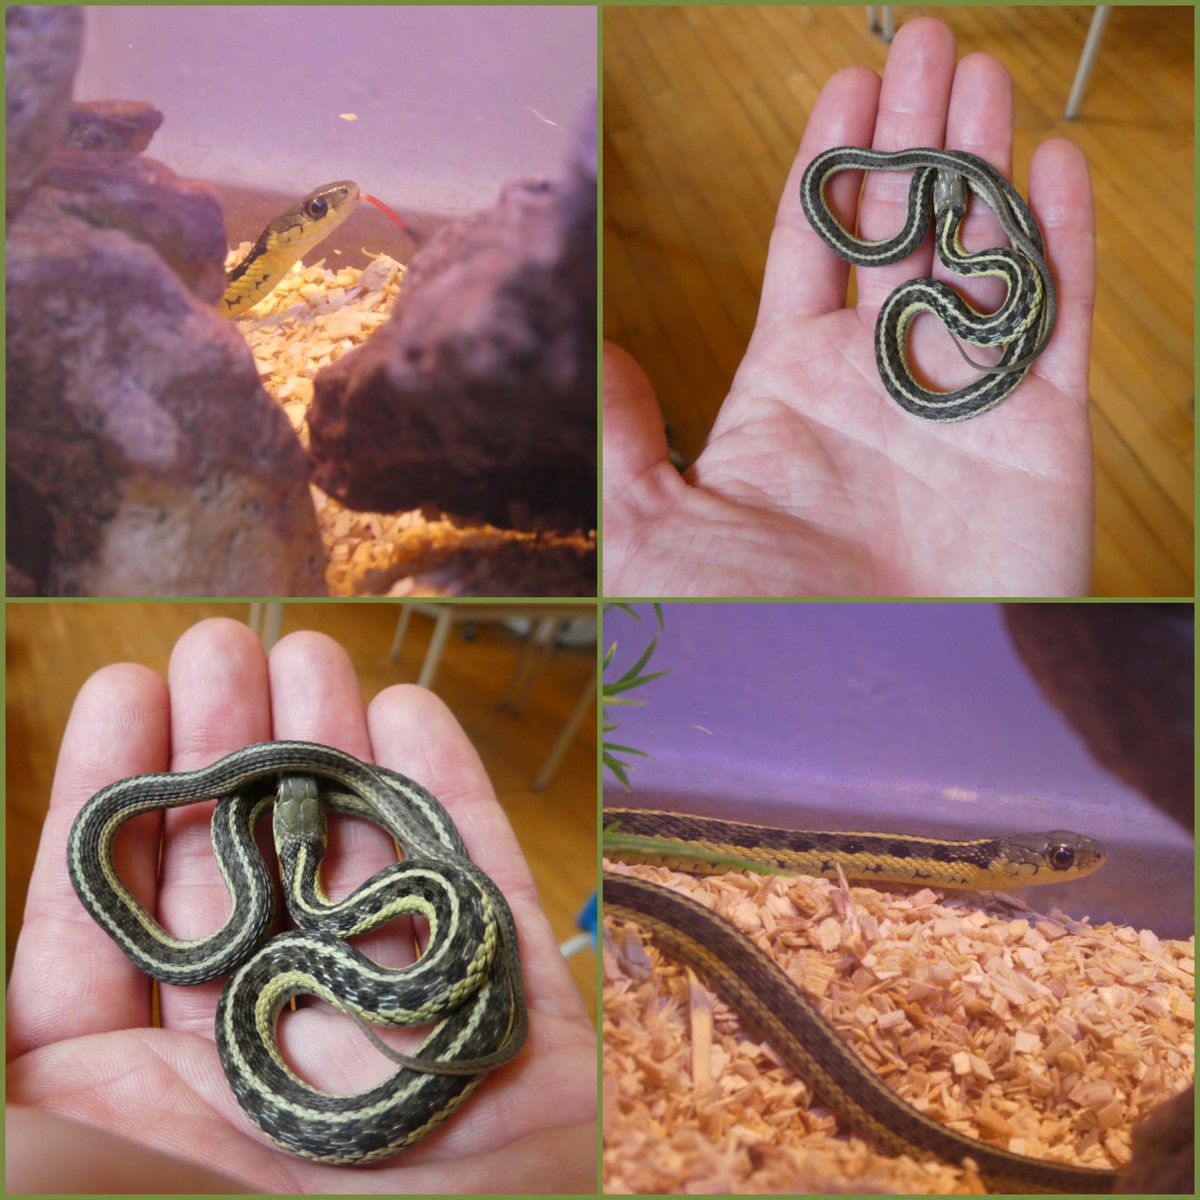 We are 🥰 excited to announce that we have a new class pet! Thank you to @ScalesNaturePrk for this wonderful experience. 🐍 It is a baby male Eastern Garter Snake (Thamnophis sirtalis sirtalis). Less than one y/o! Any name suggestions?

#classpet #snake #YRDSB @YRDSB @YRDSBGetOut